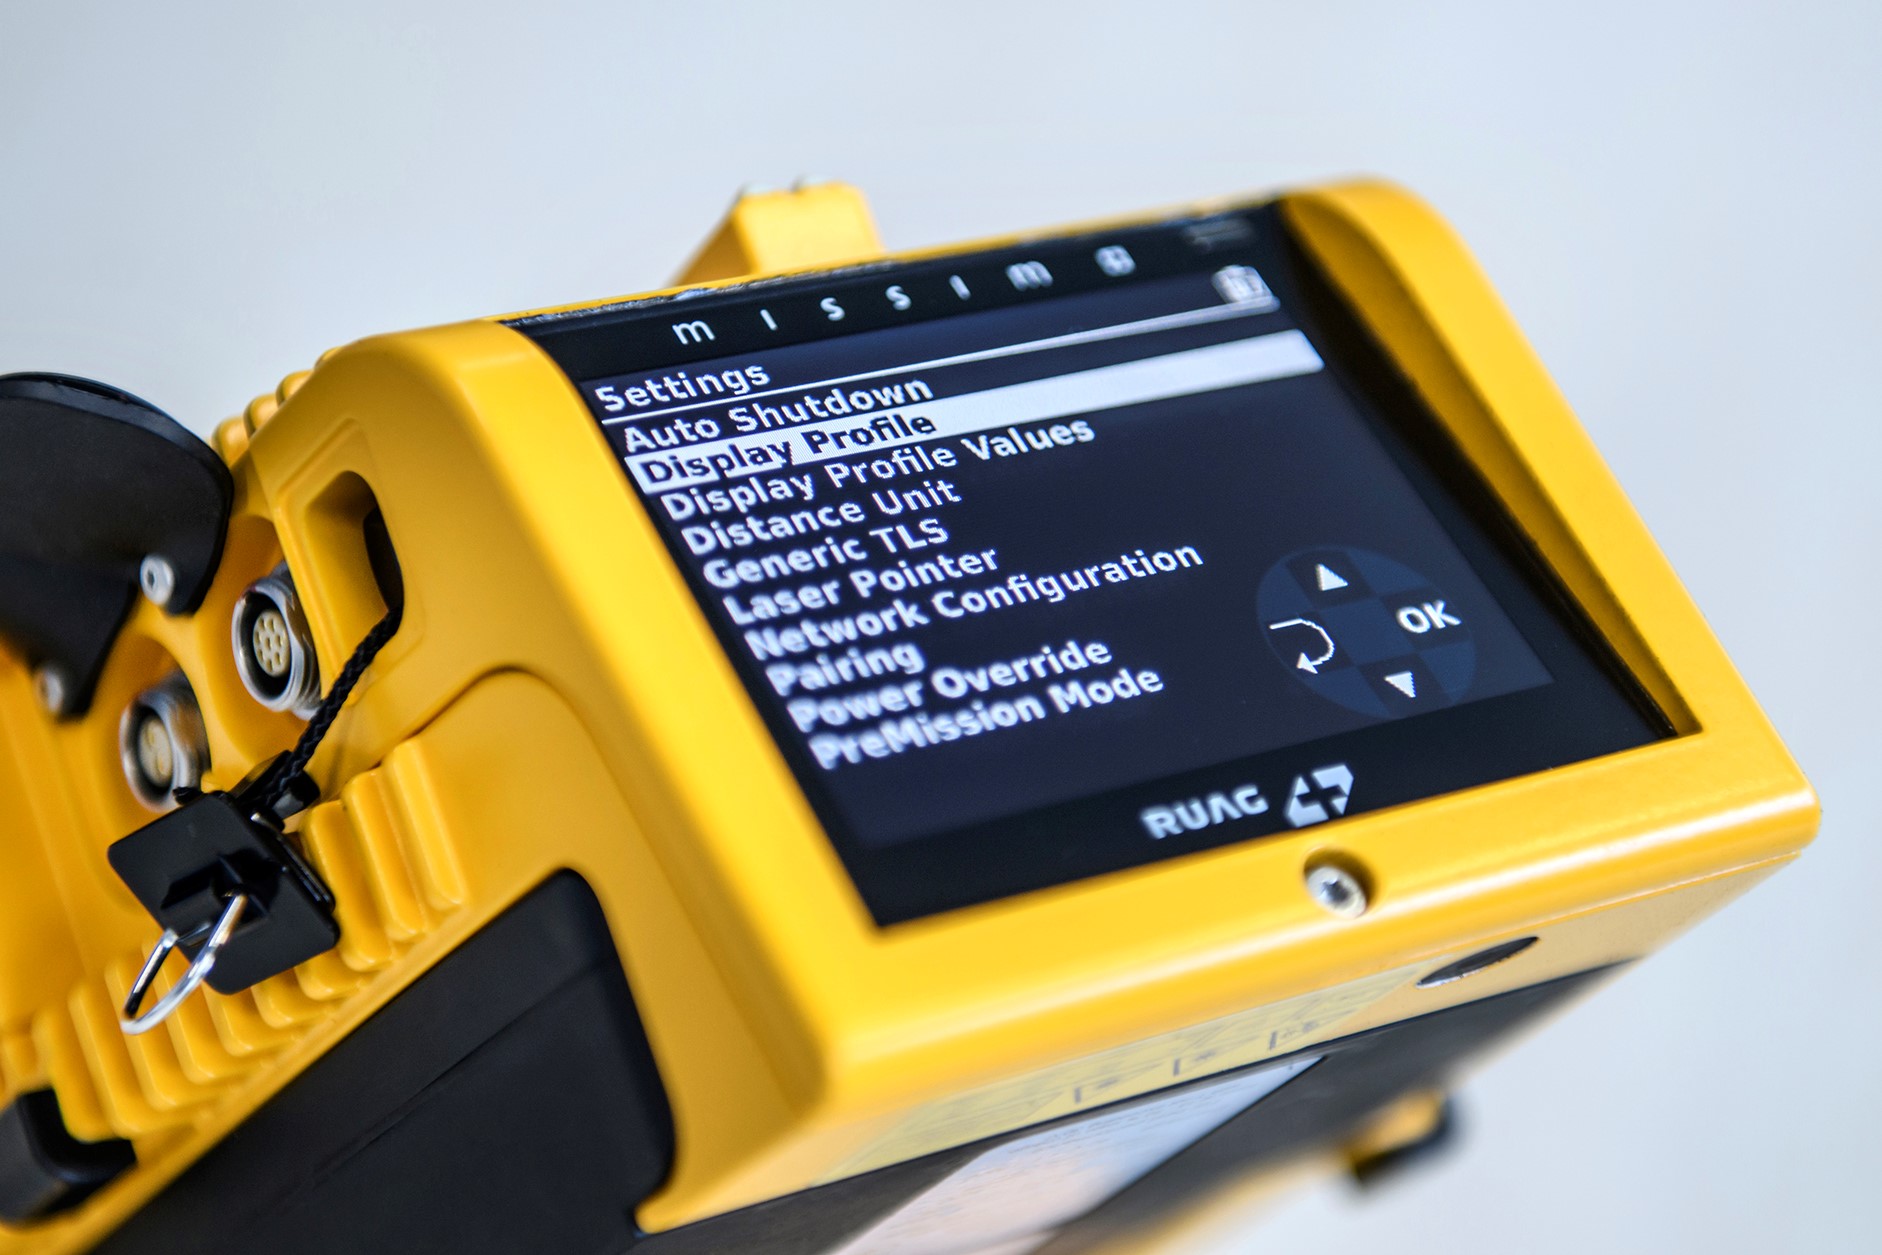 missim – the 4-in-1 test device for a secure “go or no-go” result